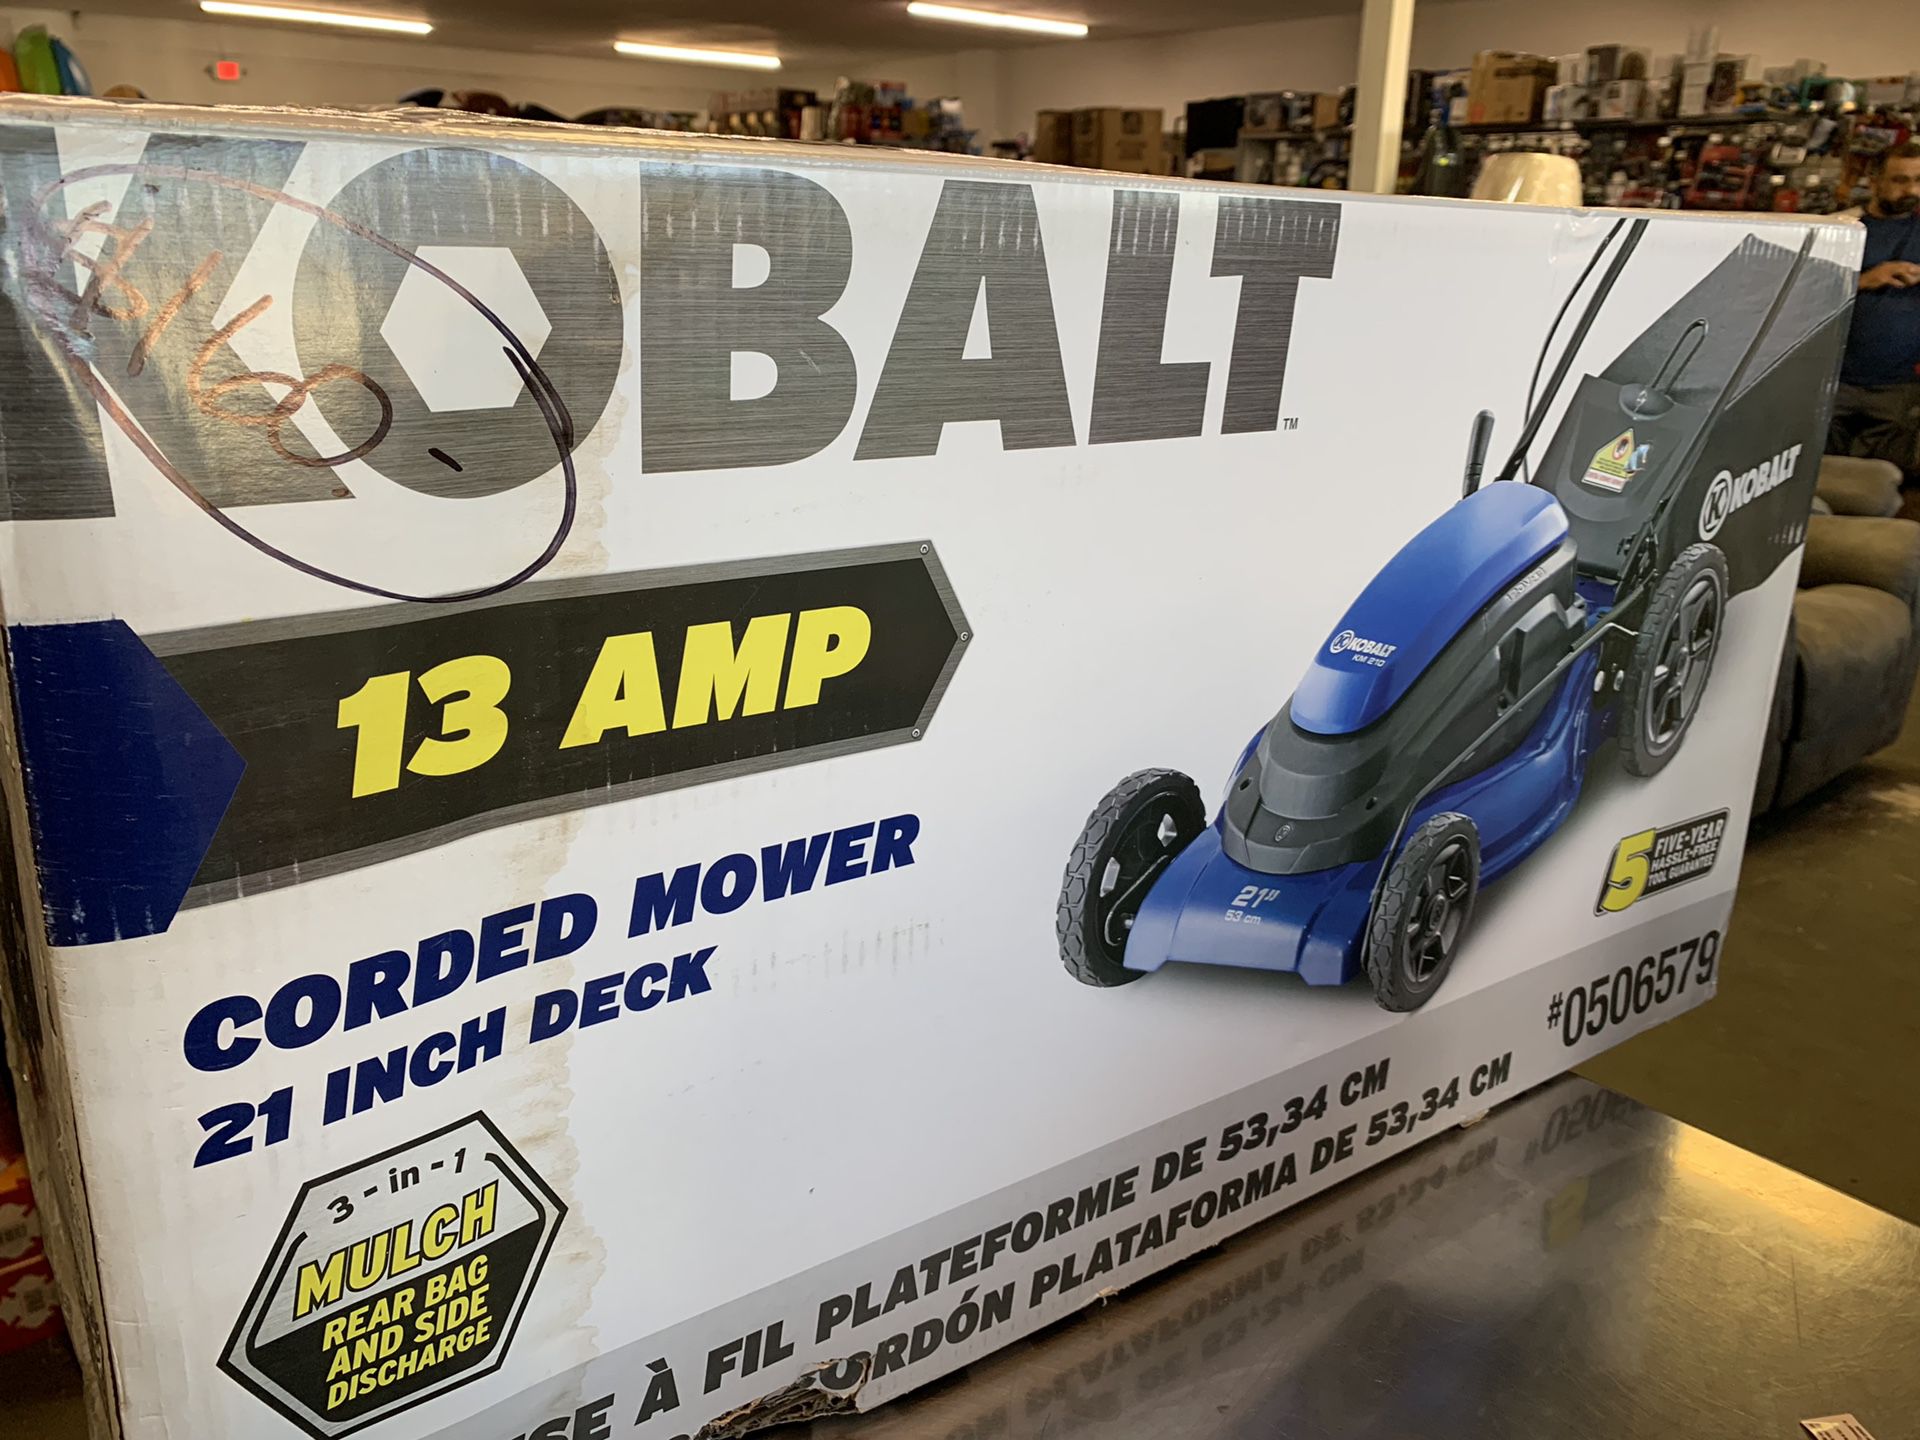 Kobalt electric lawn mower PRICE IS FIRM